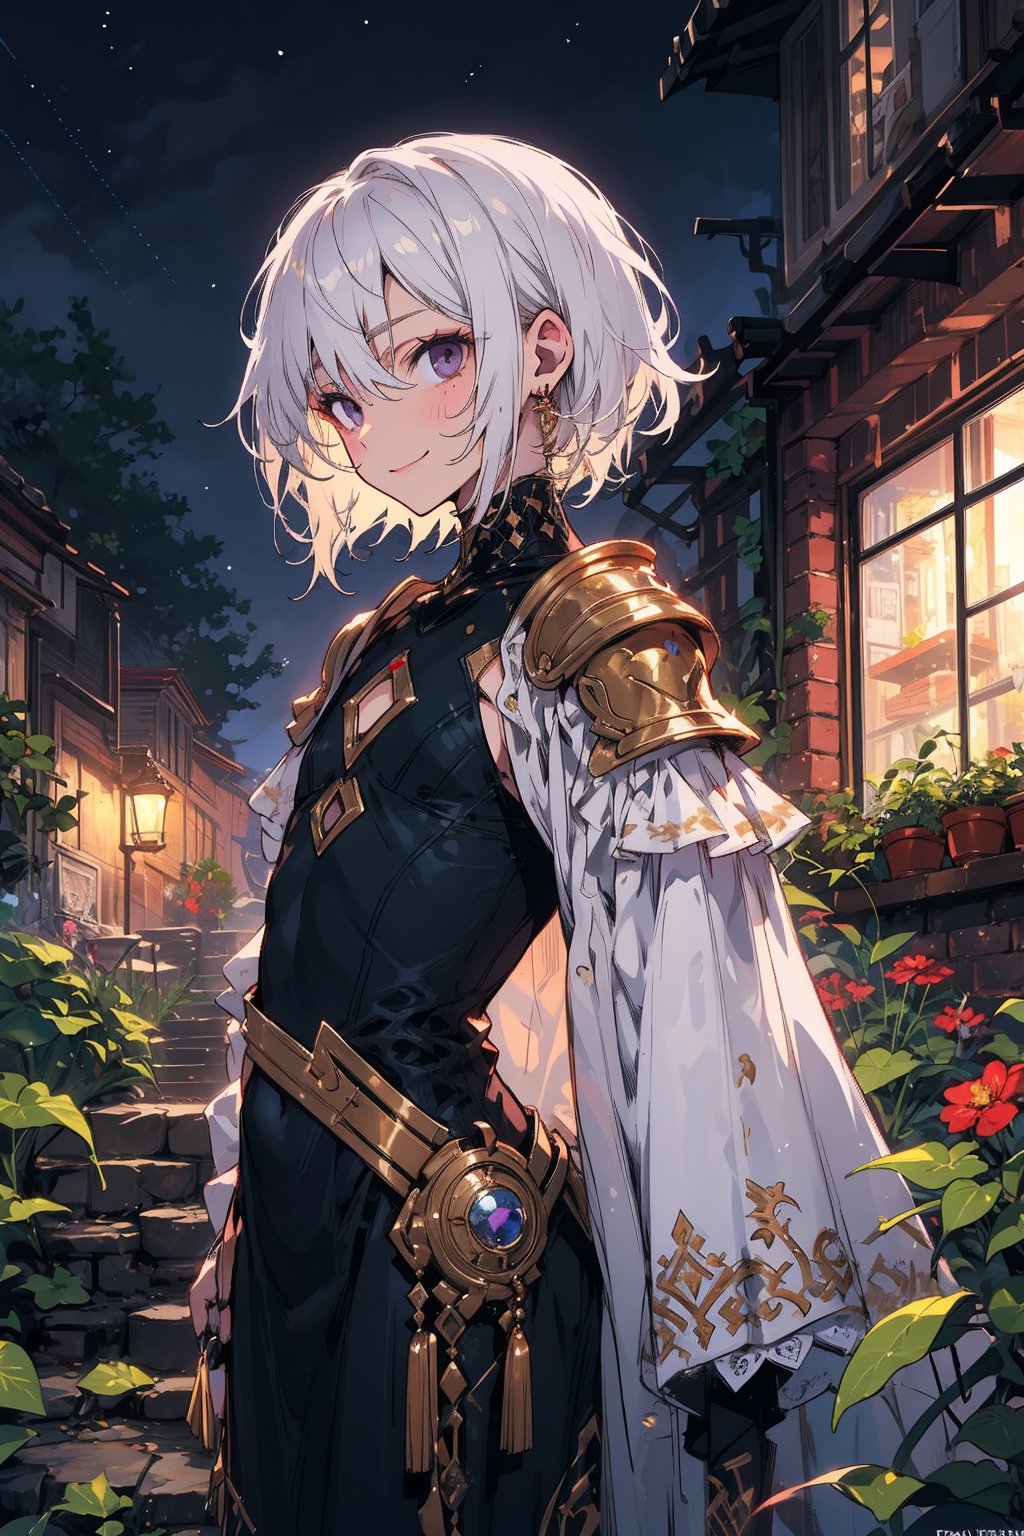 young_person, small_person, androgynous_look, flat_chest, white_hair, shoulder_length_hair, dark_eyes, black_eyes, uncertain_smile, very_slim, very_thin, close_up, fantasy_clothes, victorian_clothes, garden, night, dark_sky, small_body, white_robe, hermaphroditic_look, hermaphrodite, white_clothes, gold_marks, boyish_look, young_boy, tomboy